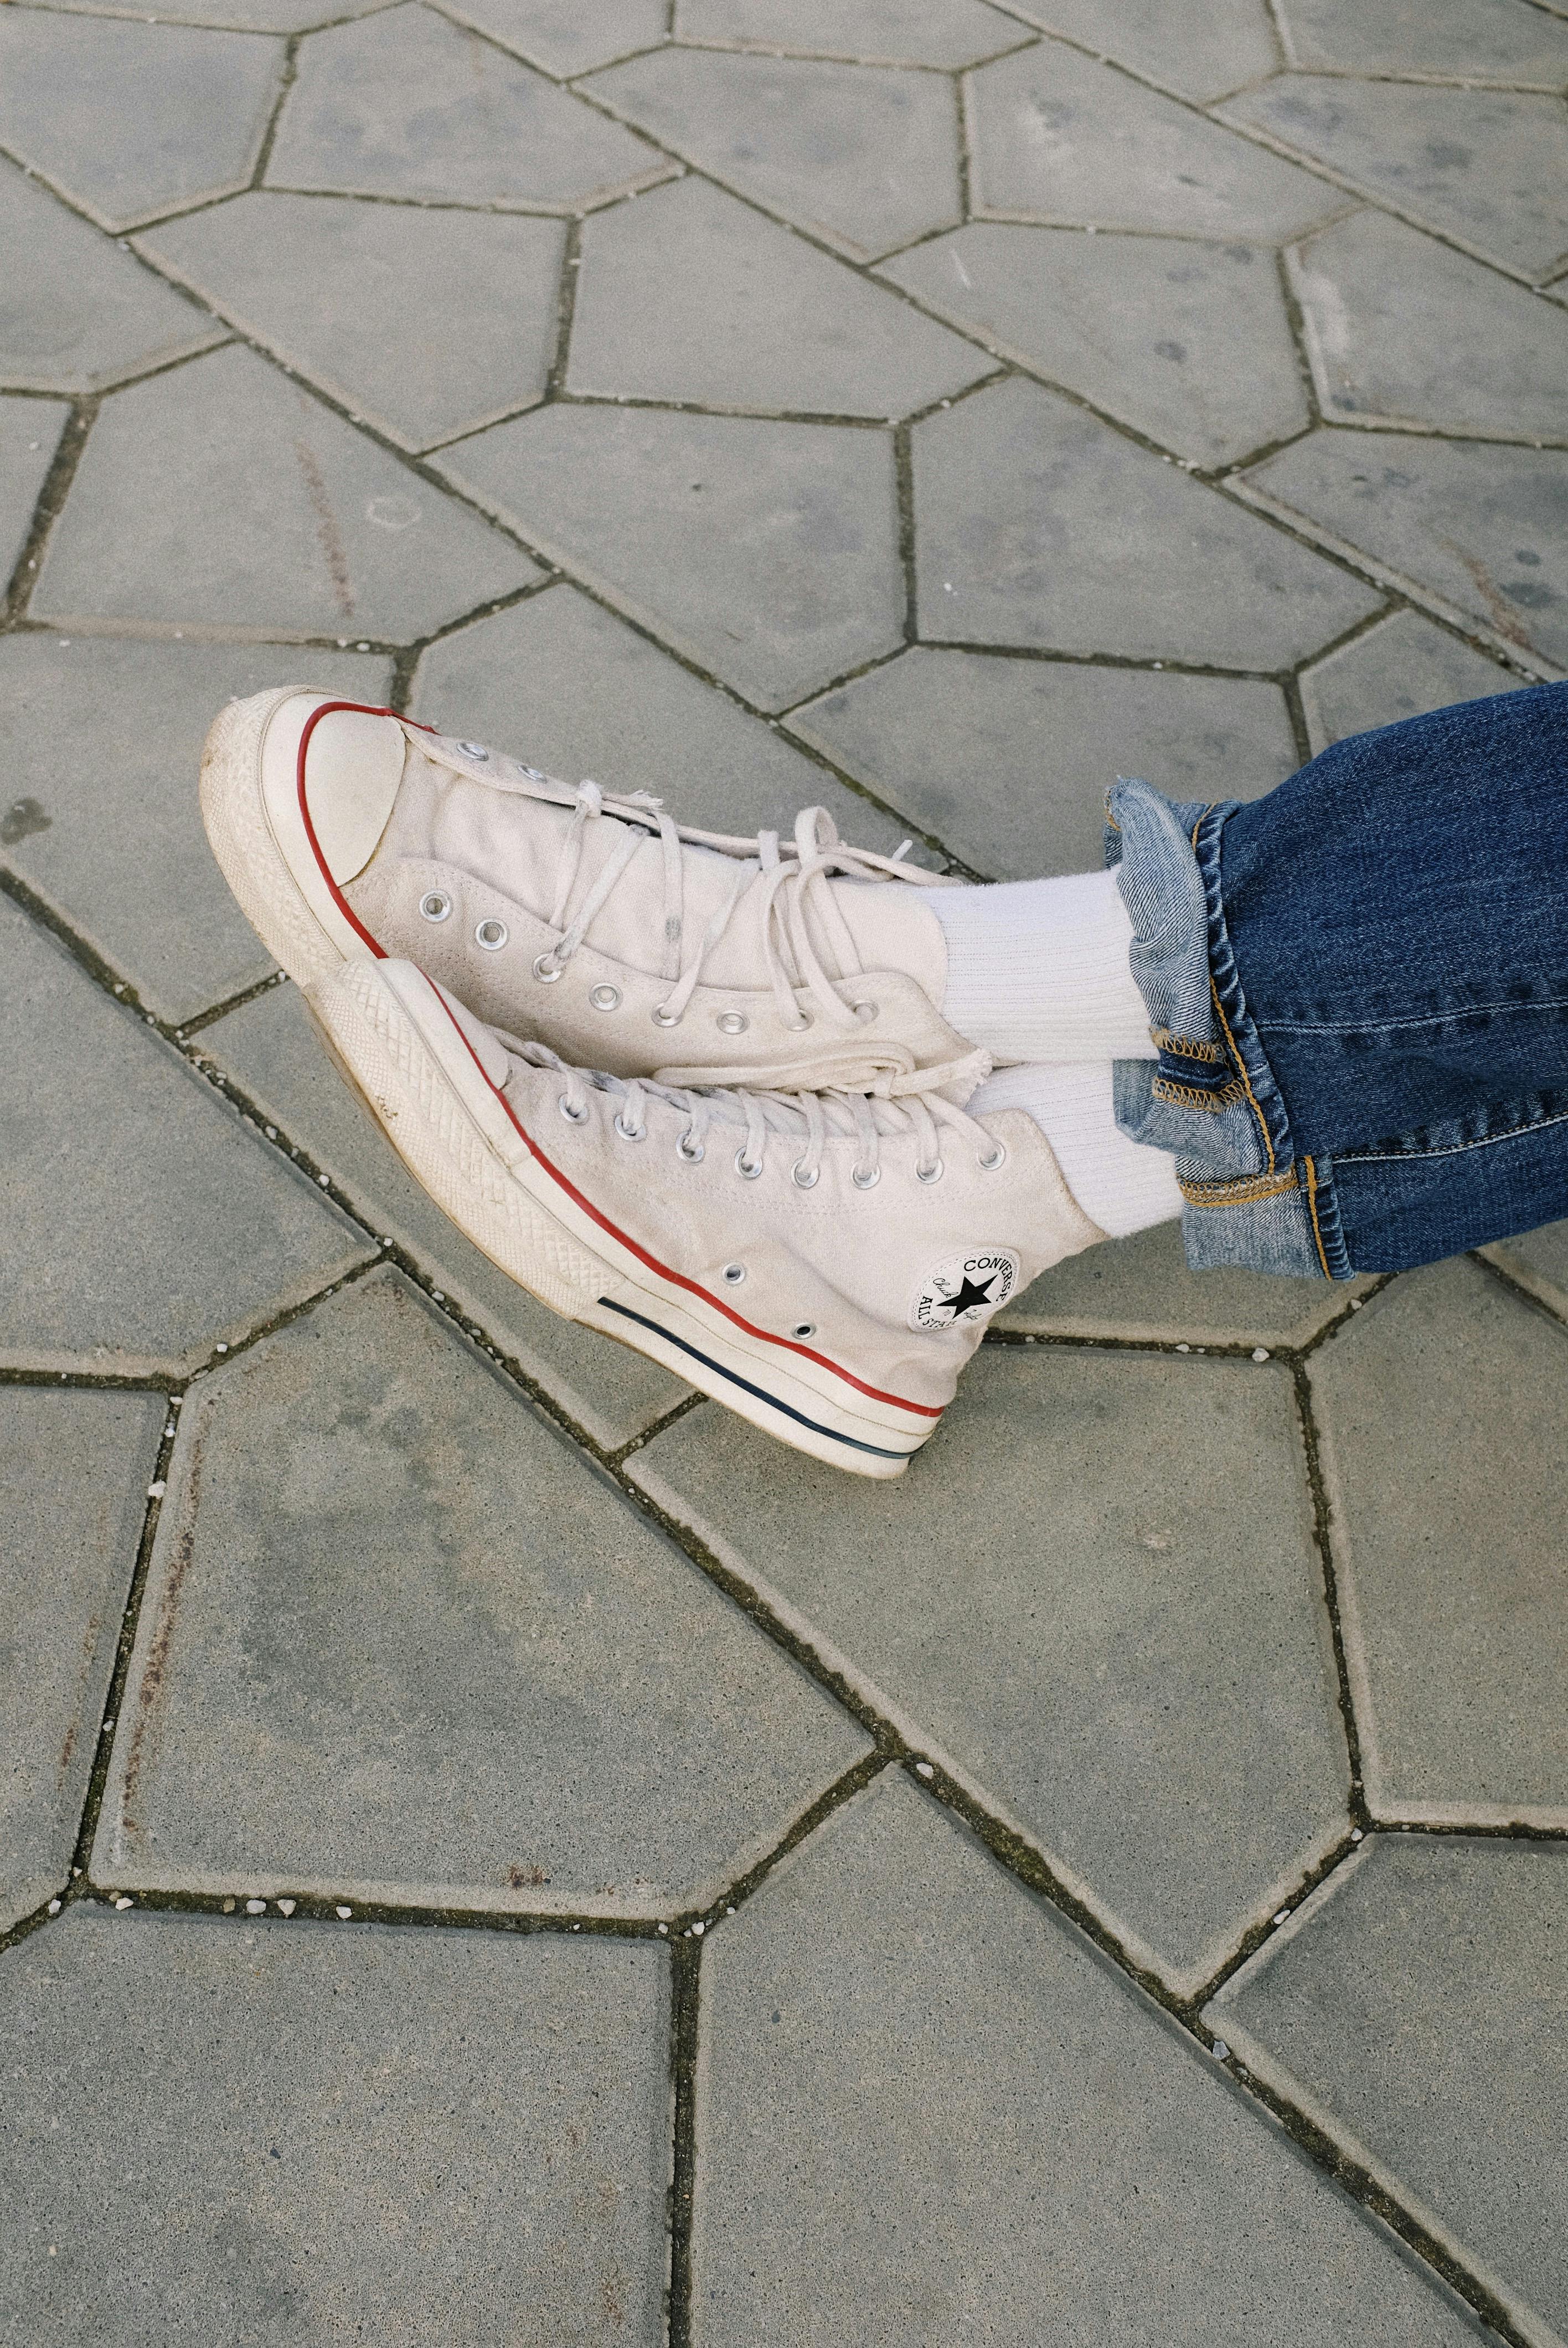 Person Wearing Denim Jeans and White Converse Sneakers · Free Stock Photo